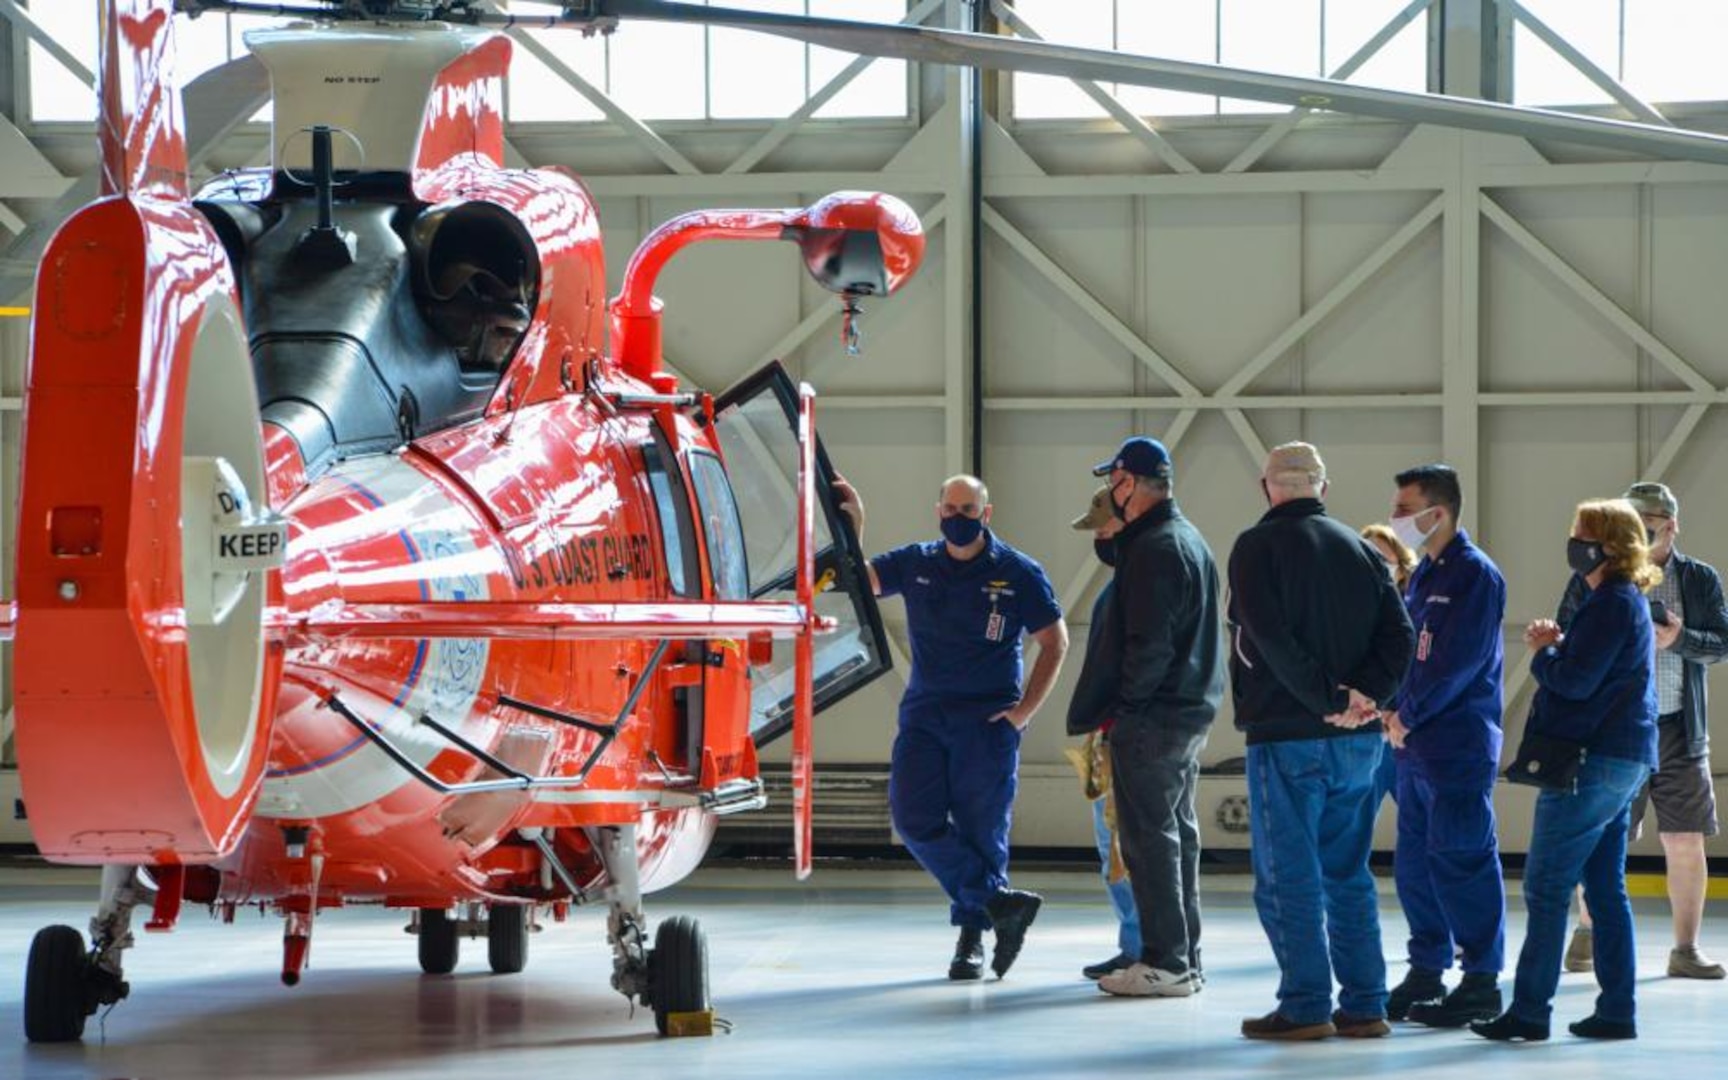 Chief Petty Officer Timothy Willis, a crewmember at the Coast Guard National Capital Region Air Defense Facility, shows an MH-65 Dolphin helicopter to Vietnam veterans from the Coast Guard Cutter Owasco (WHEC-39), a 255-foot high endurance cutter, during a tour of Coast Guard Air Station Washington, Nov. 5, 2021. The veterans were given an air station tour and were presented with official lapel pins commemorating their service and for the 50th anniversary of the Vietnam War. (U.S. Coast Guard photo by Petty Officer 1st Class Tara Molle-Carr/Released)